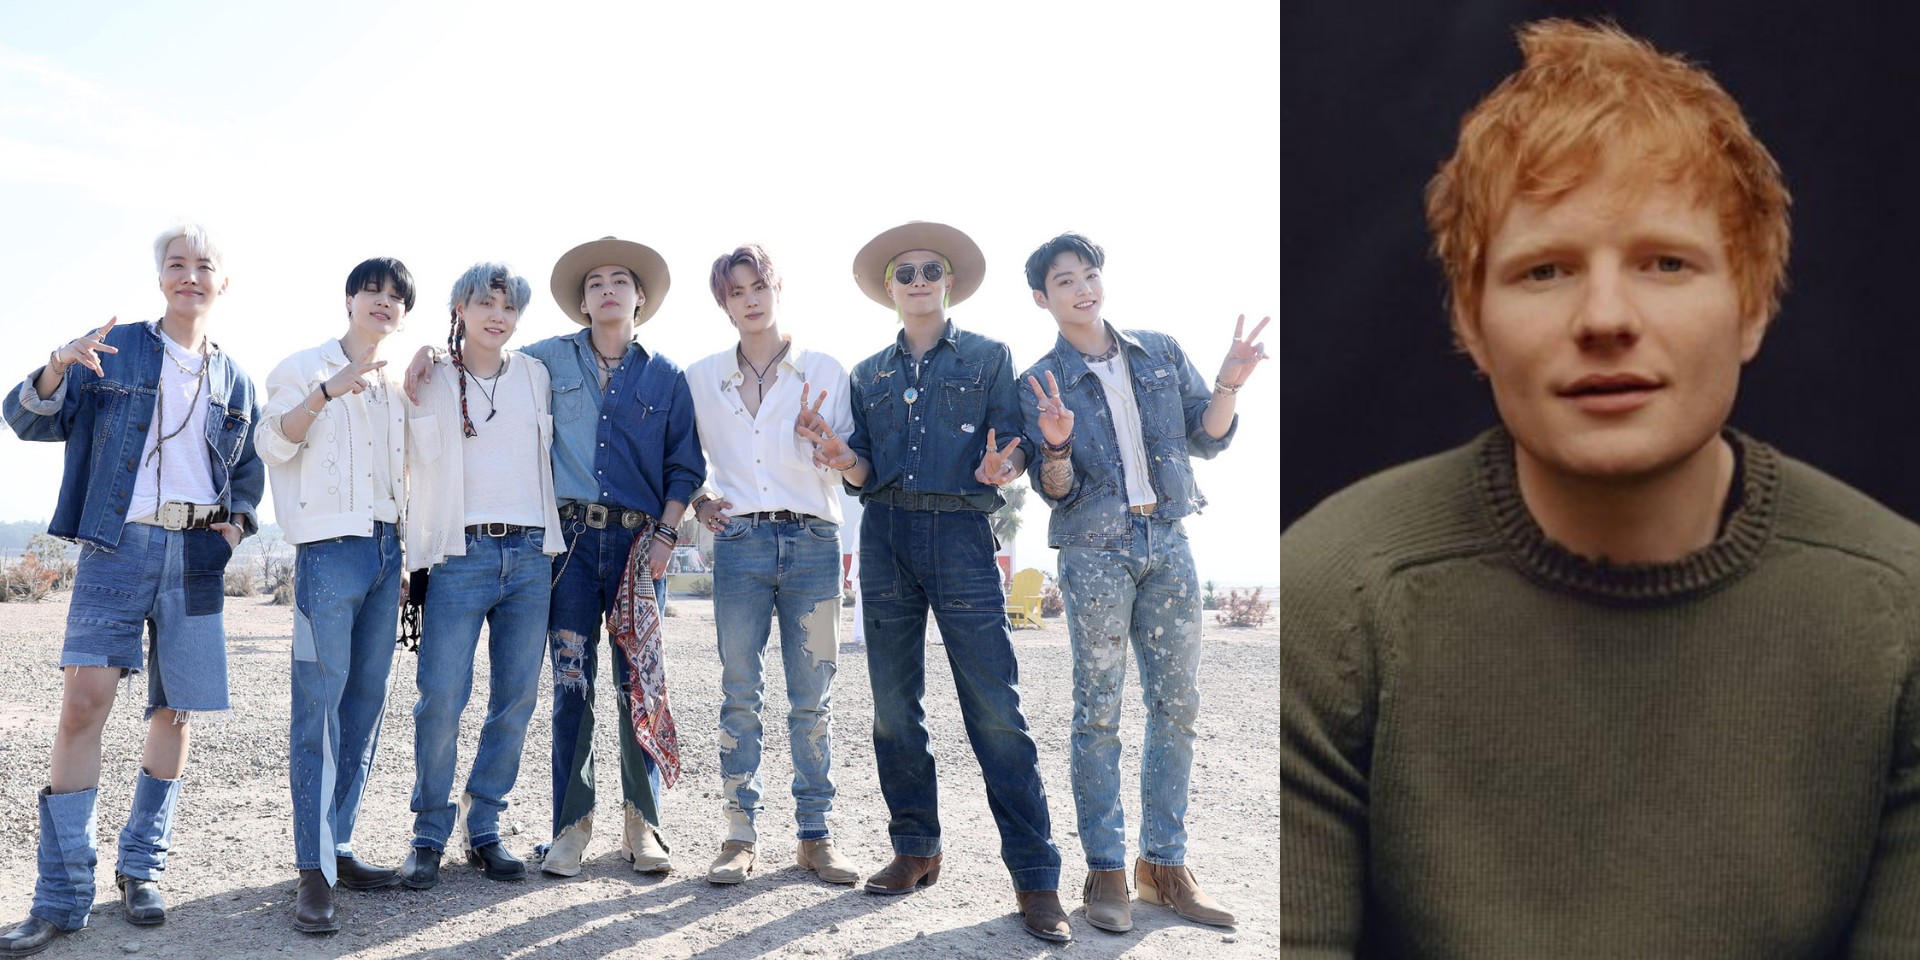 'Permission To Dance' gives BTS fifth Billboard Hot 100 number 1 single, Ed Sheeran's fourth number 1 hit as a songwriter